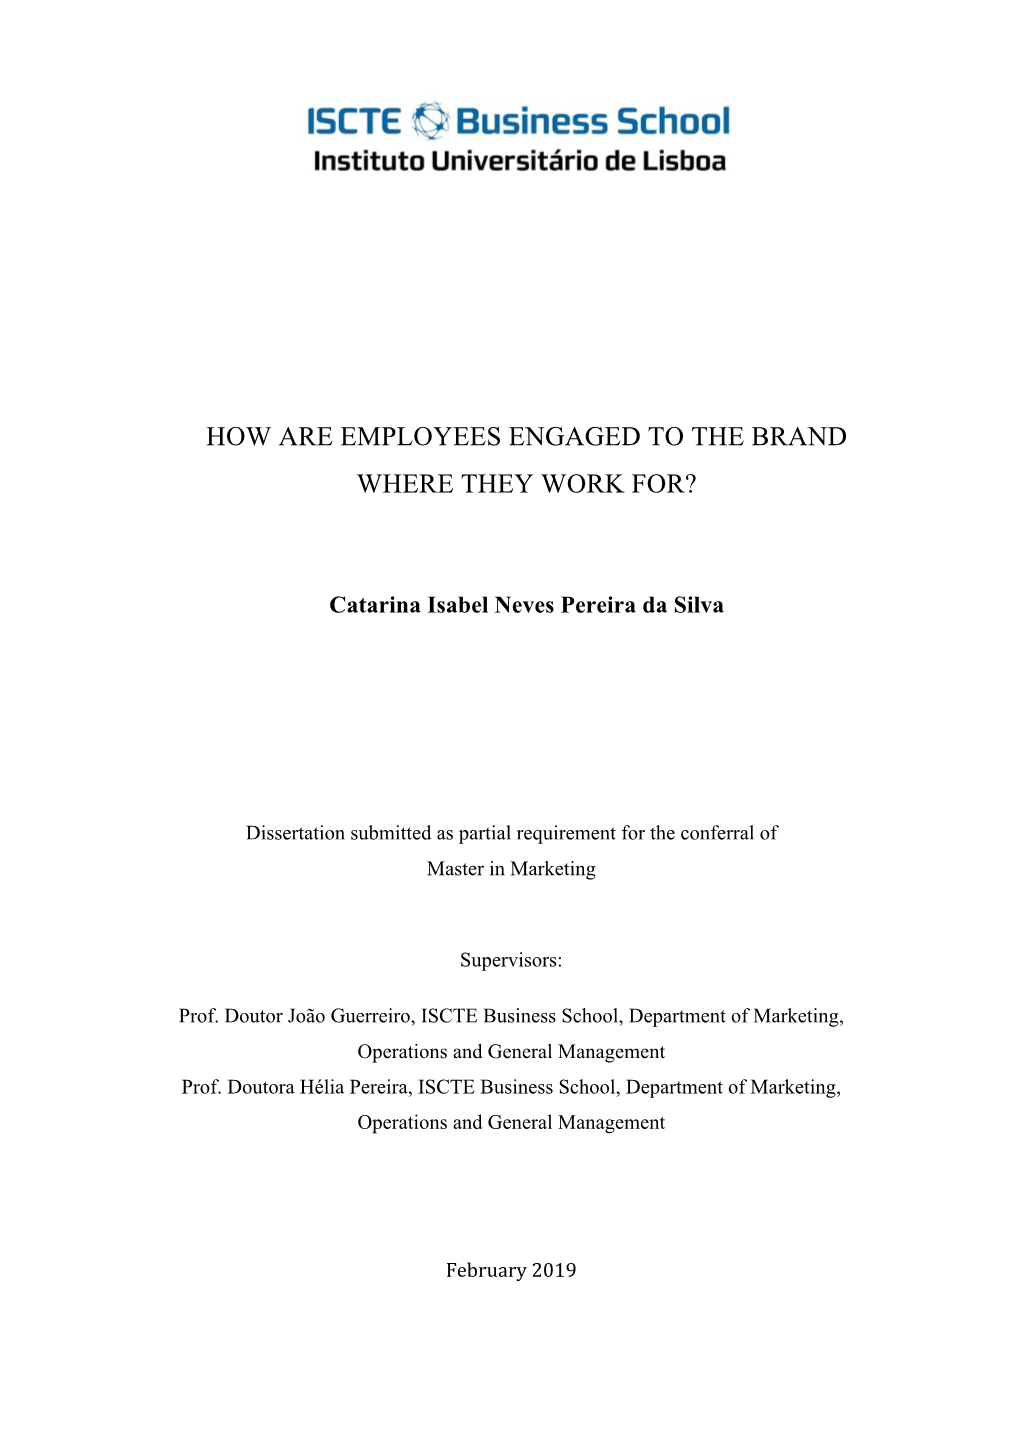 How Are Employees Engaged to the Brand Where They Work For?